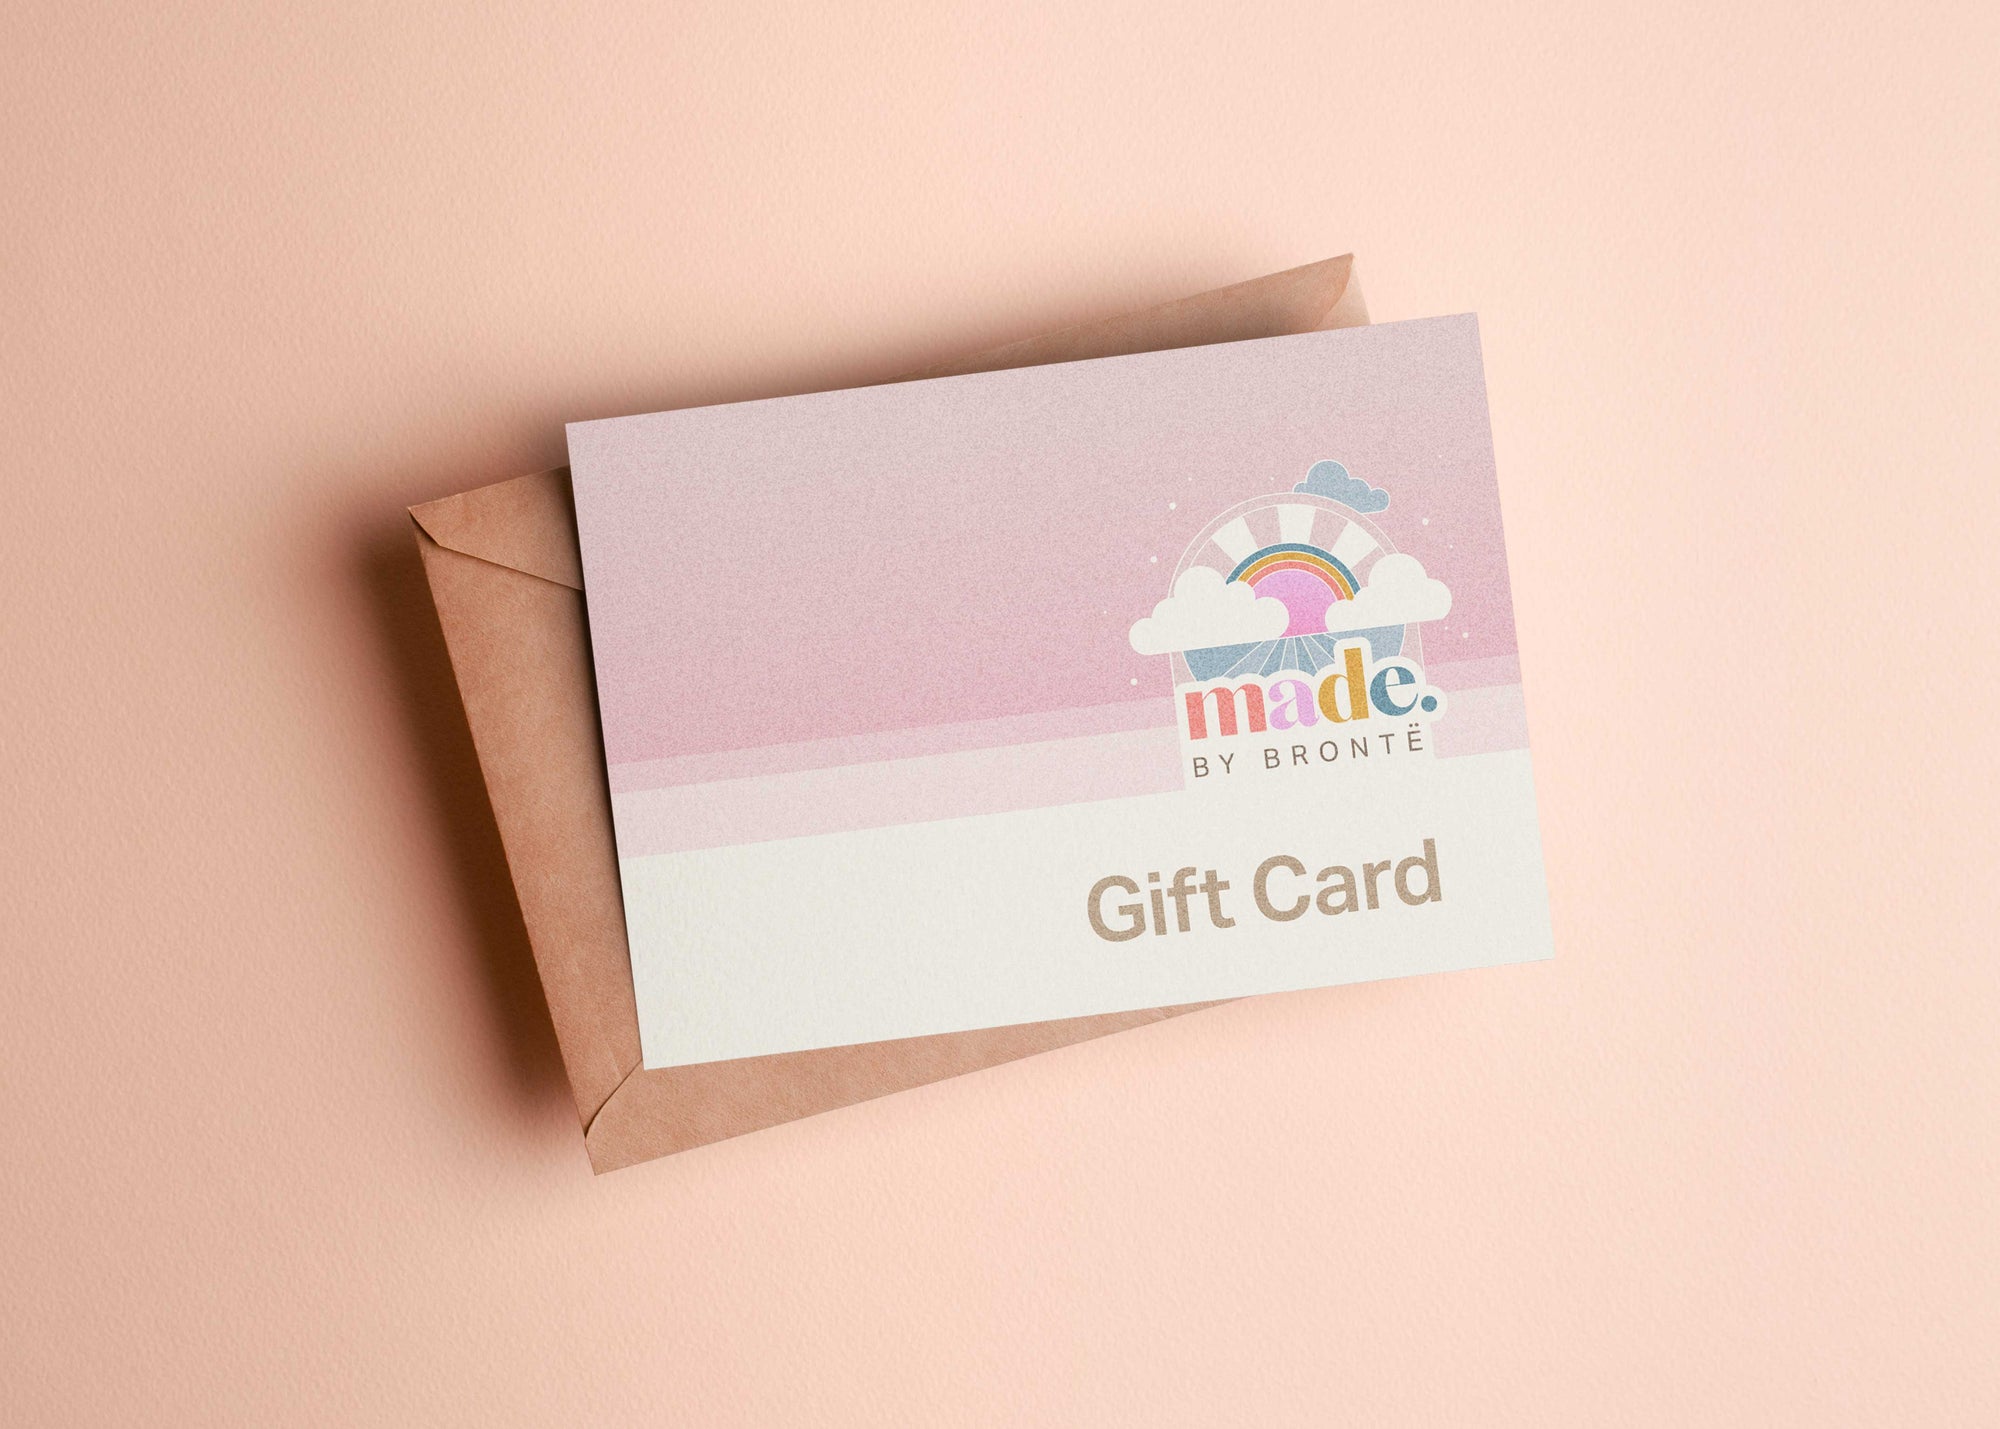 Made. By Bronte Gift Card